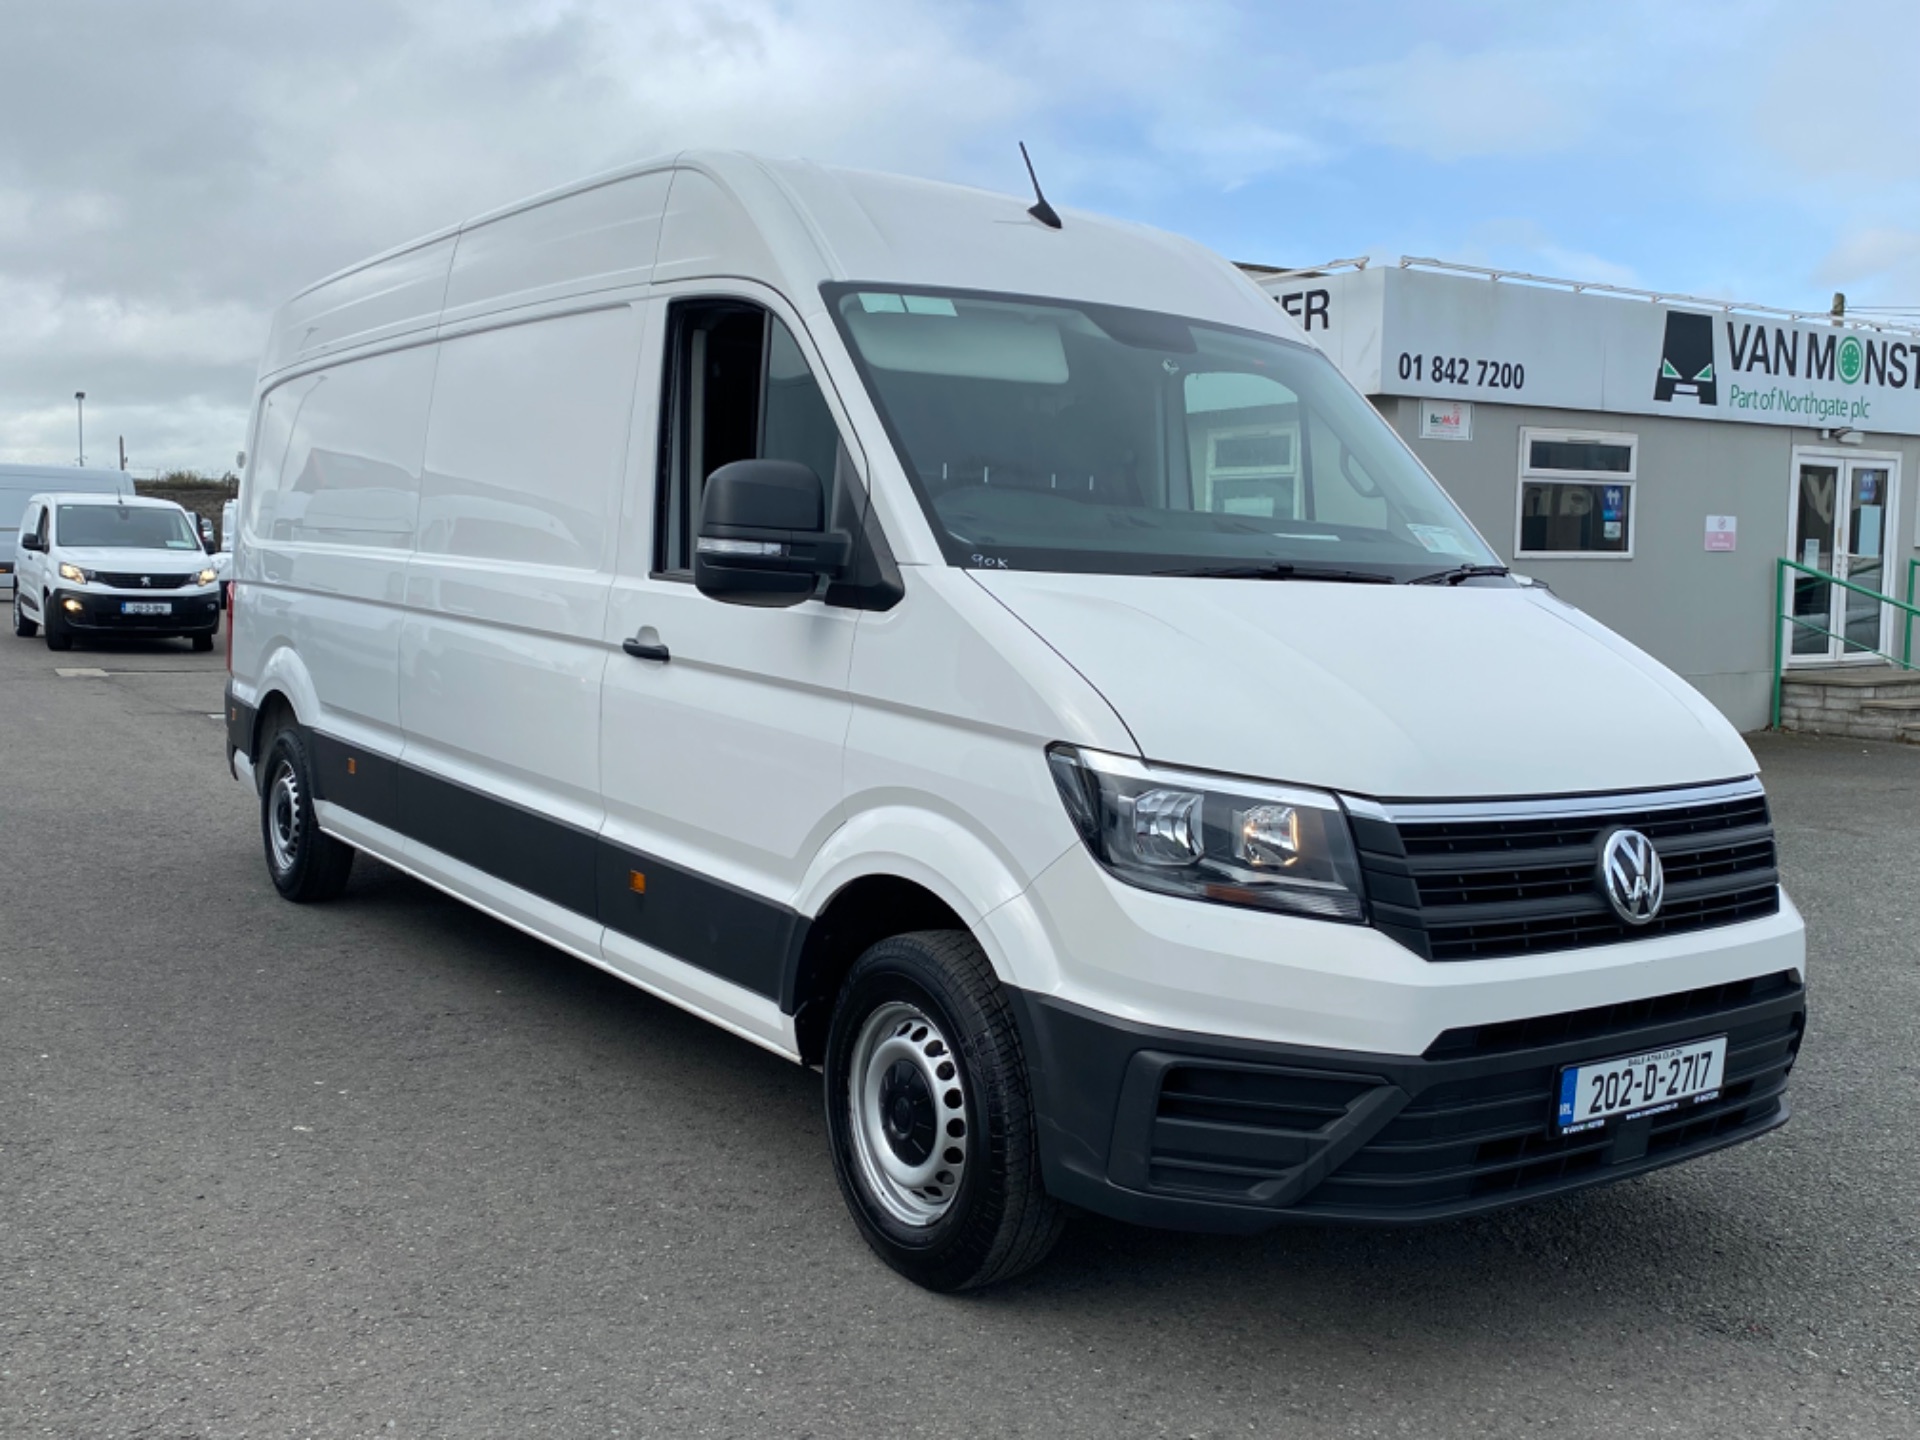 2020 Volkswagen Crafter 35 LWB 140HP M6F 5DR (202D2717)